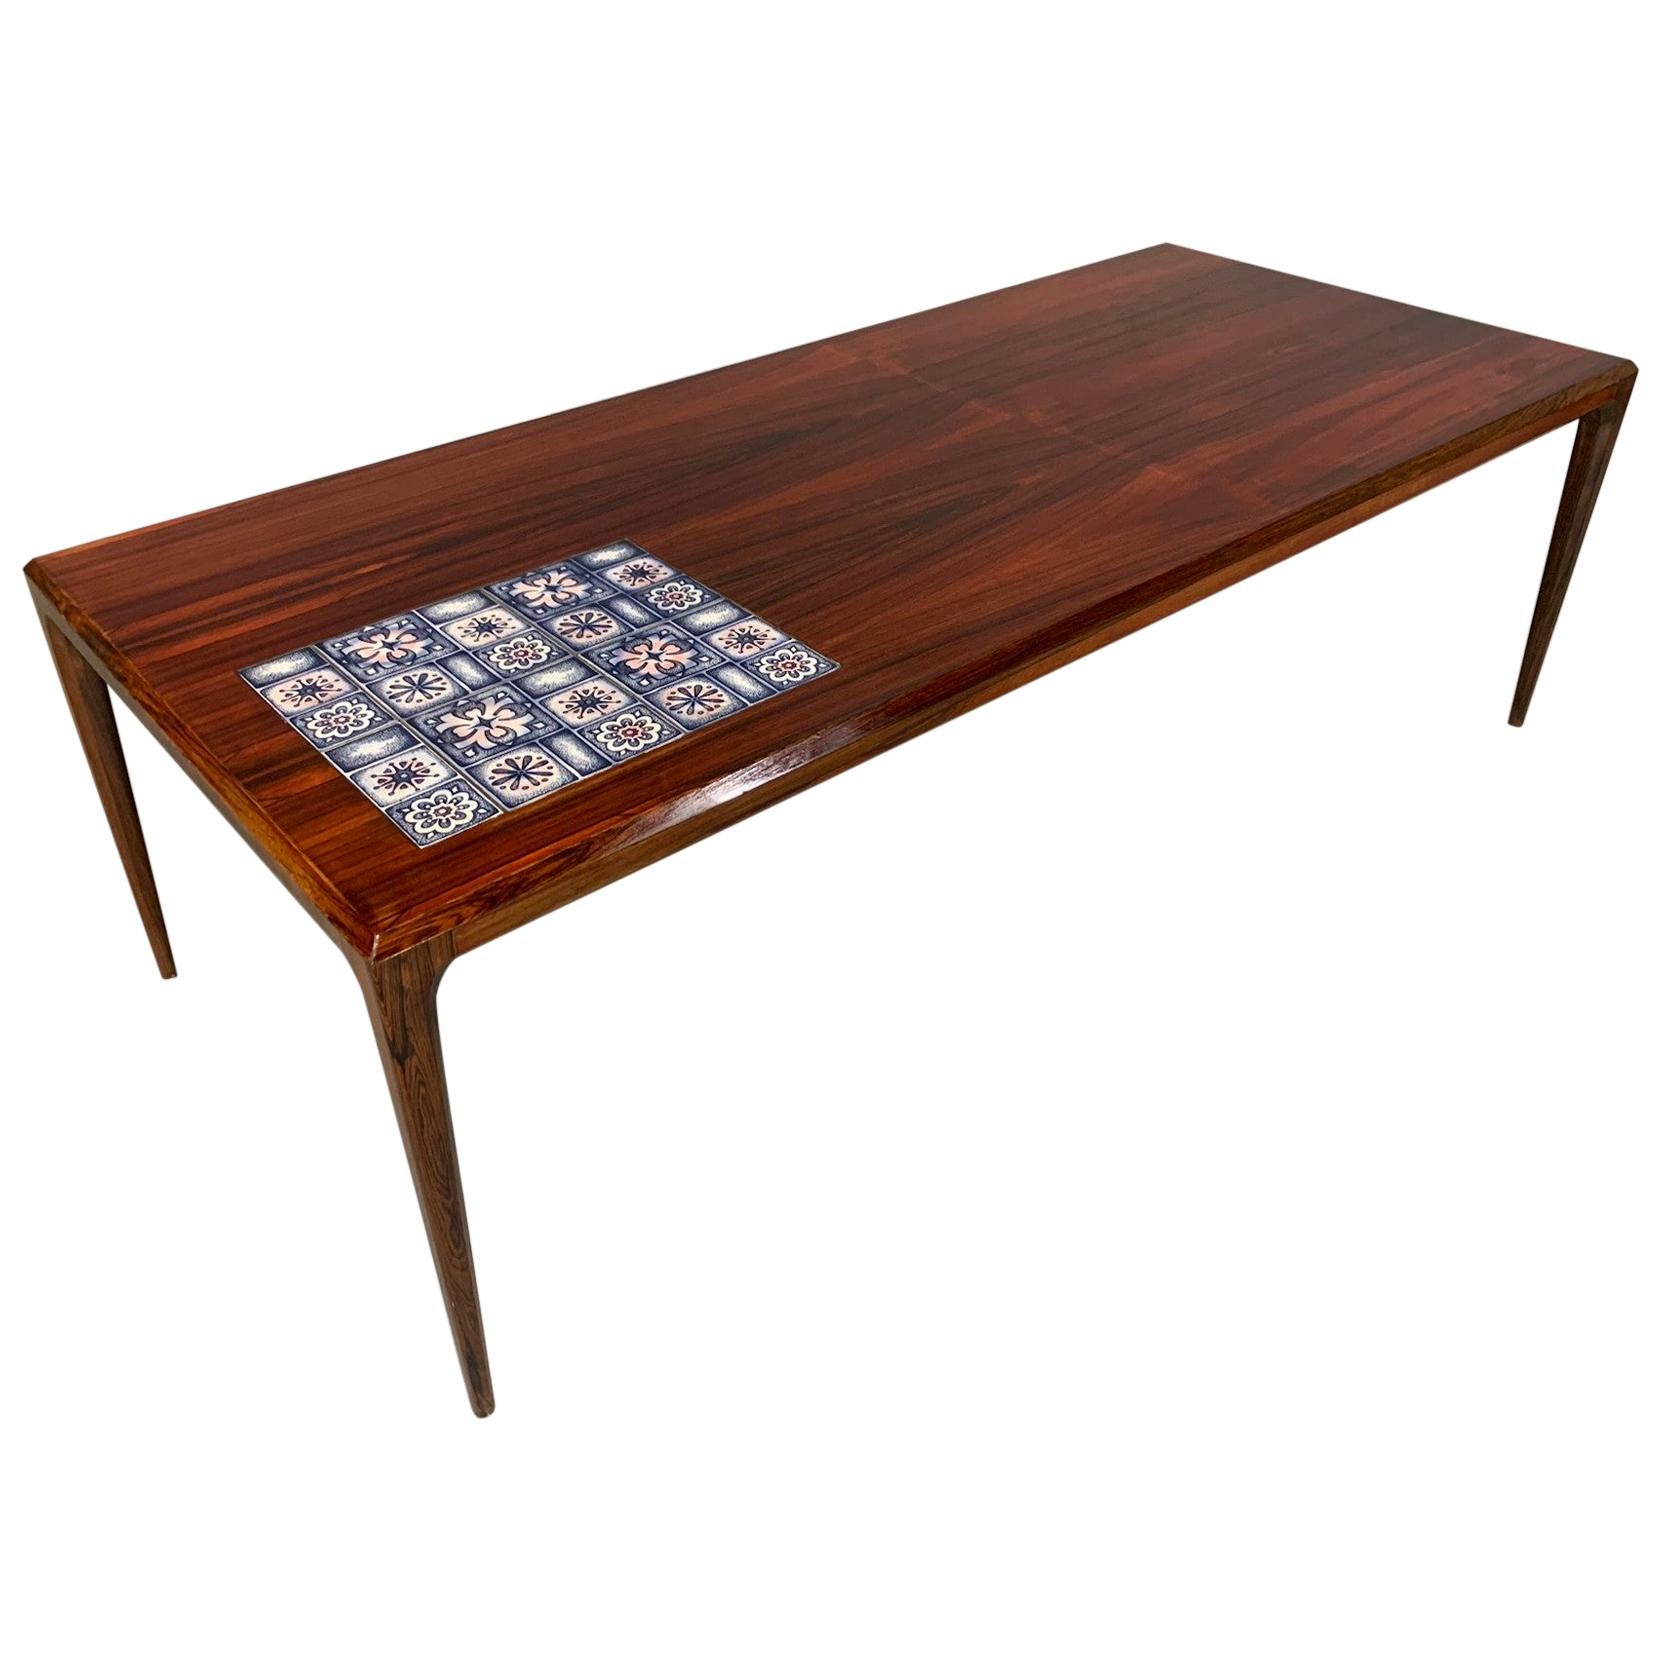 Johannes Andersen for Silkeborg Danish Design Rosewood Coffee and Tile Table